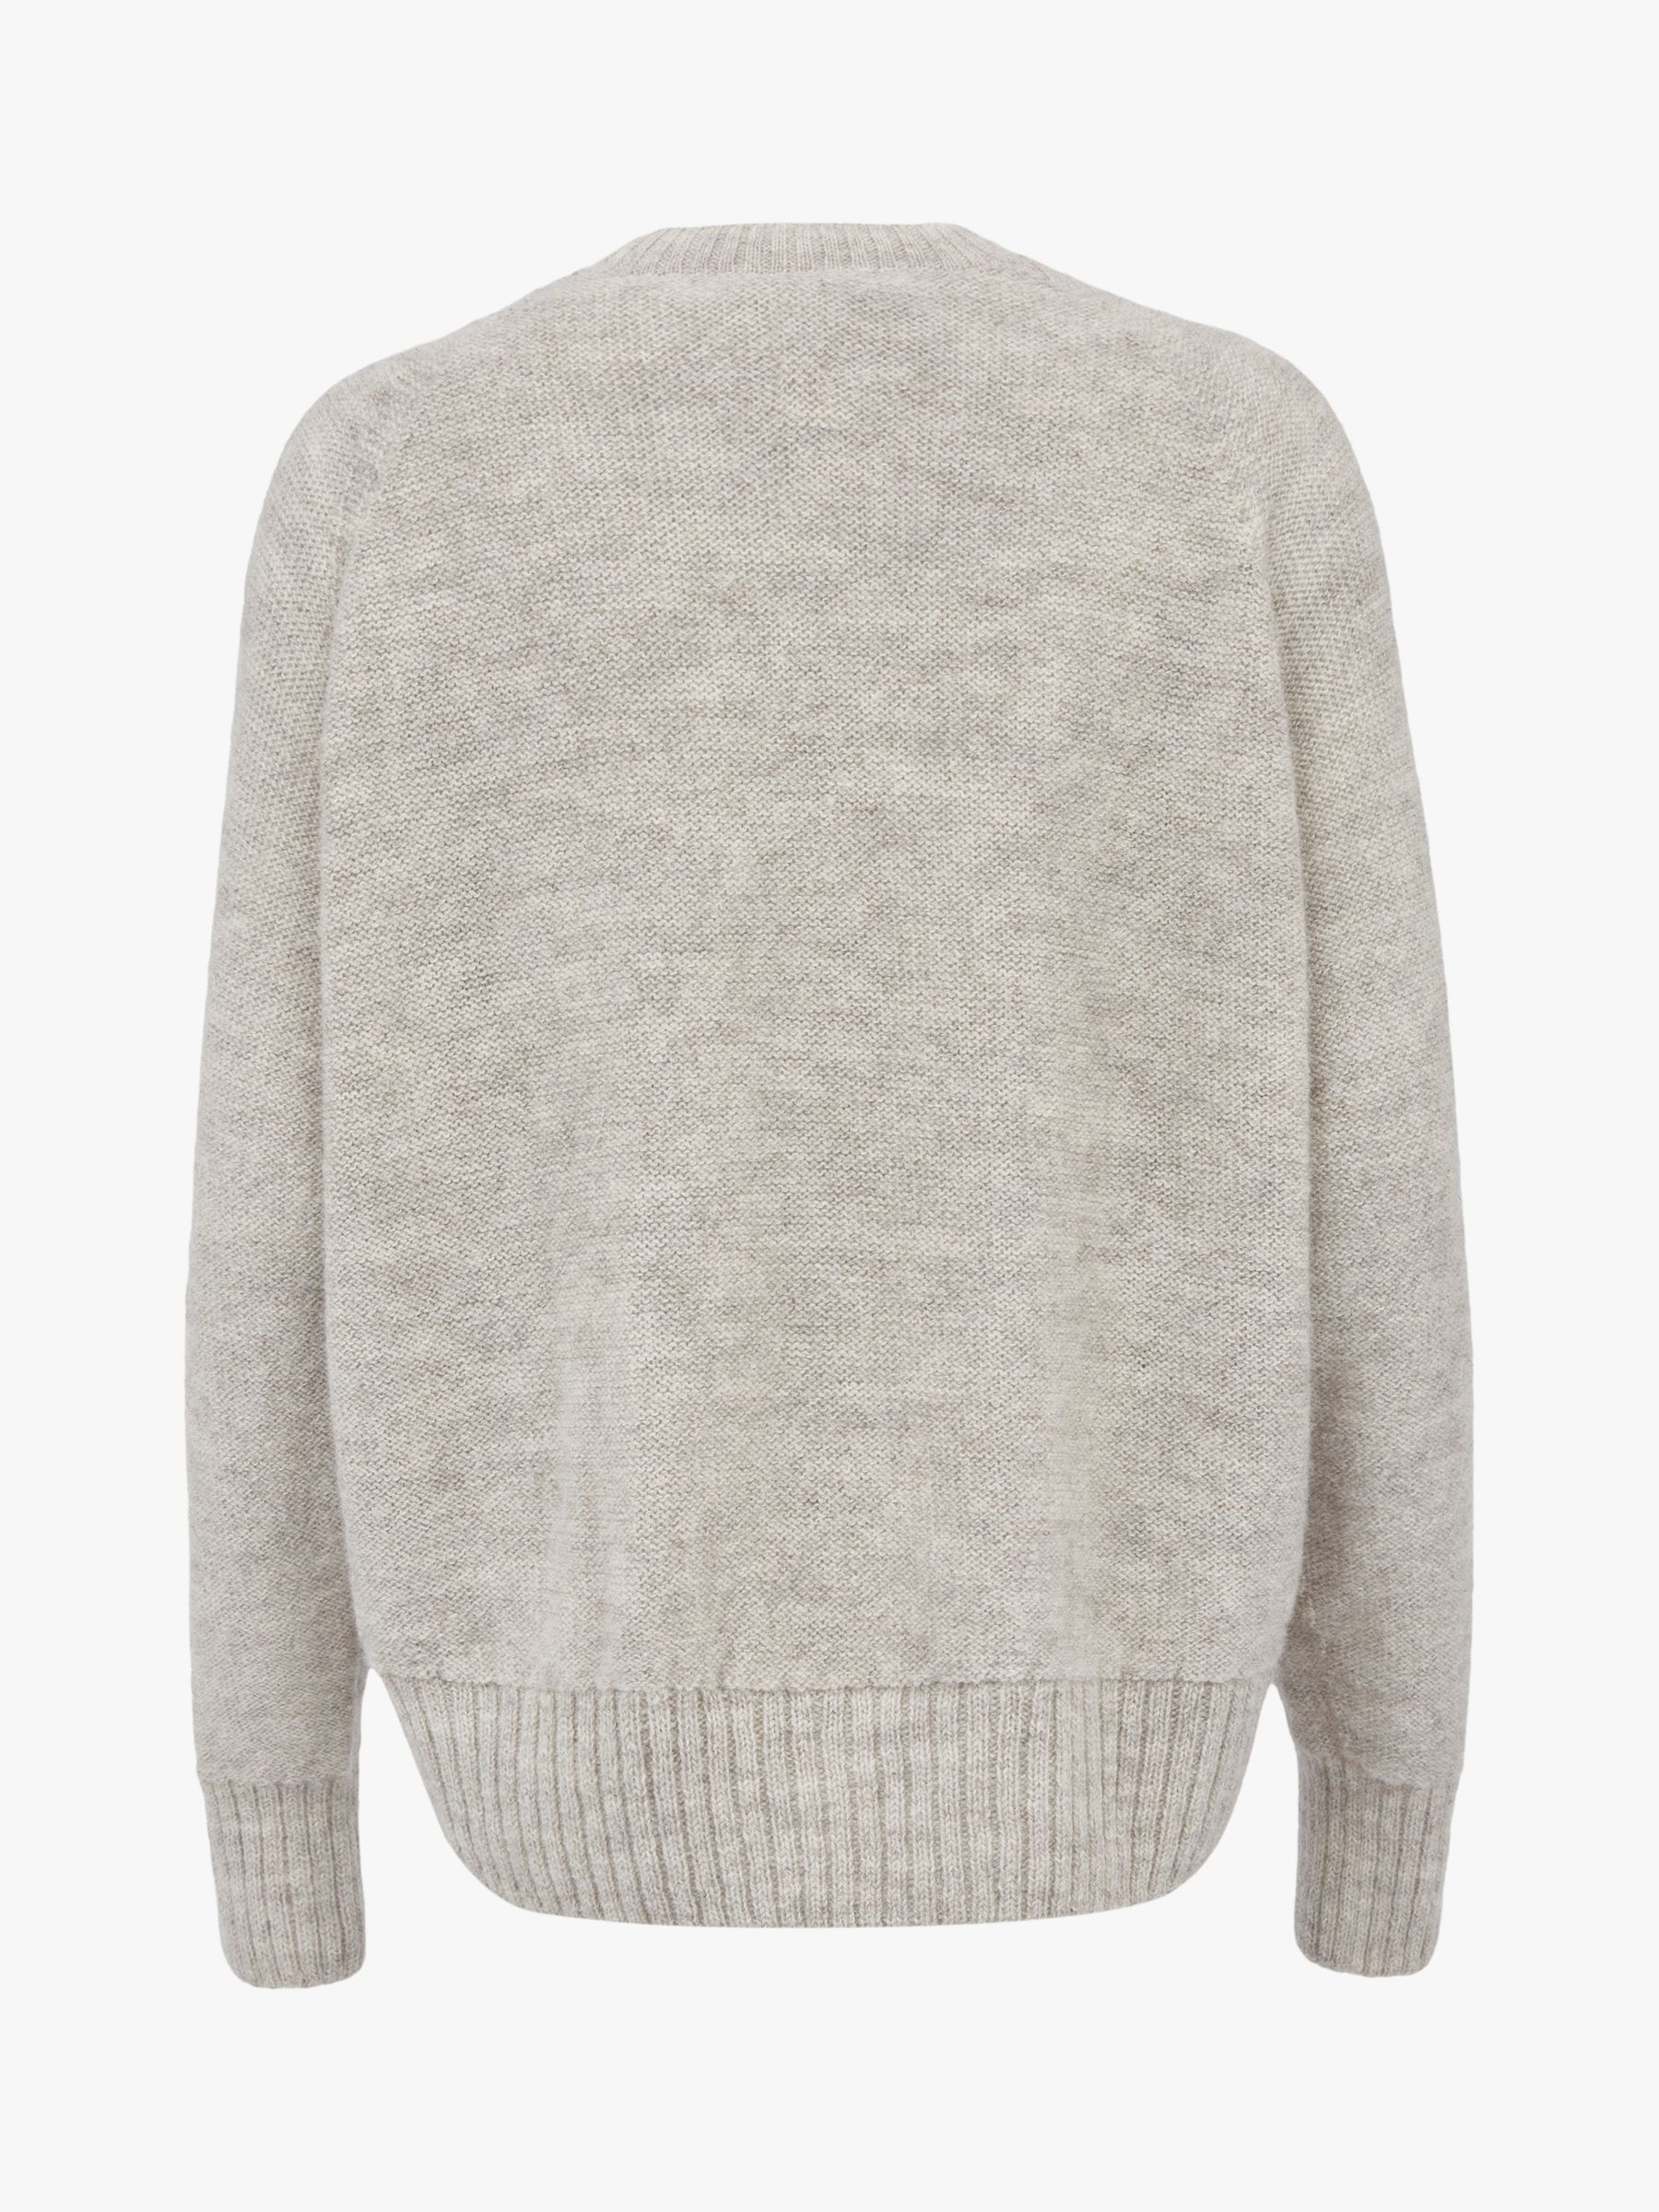 Buy Celtic & Co. British Wool Cable Knit Zip Cardigan, Undyed Taupe Online at johnlewis.com